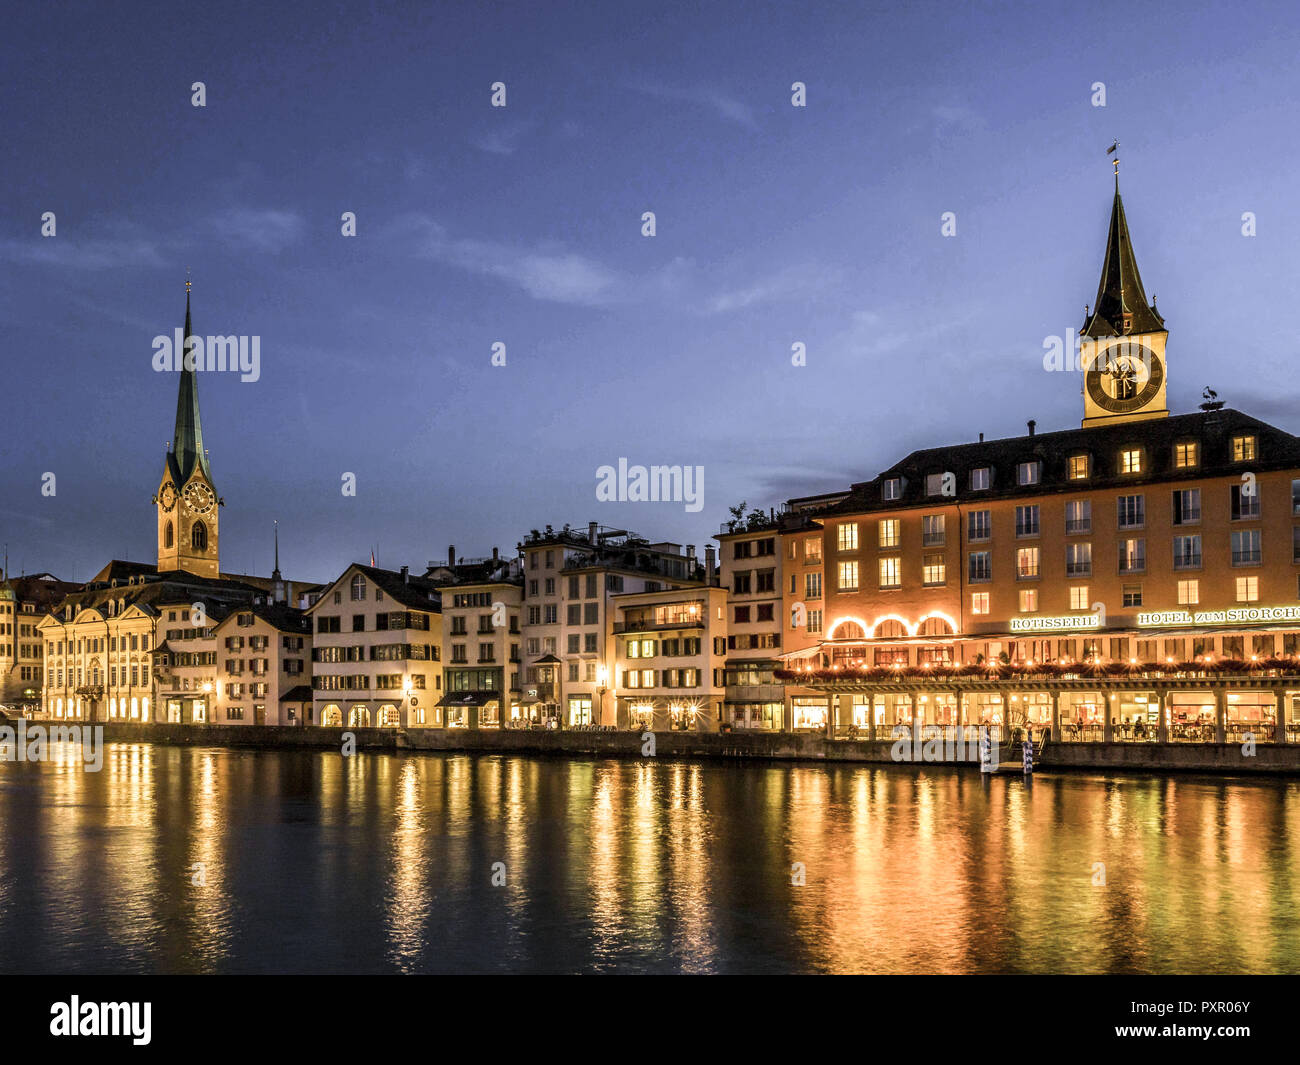 Frauenmunster Abbey and St. Peters Church in Zurich at night, Switzerland, Europe Stock Photo